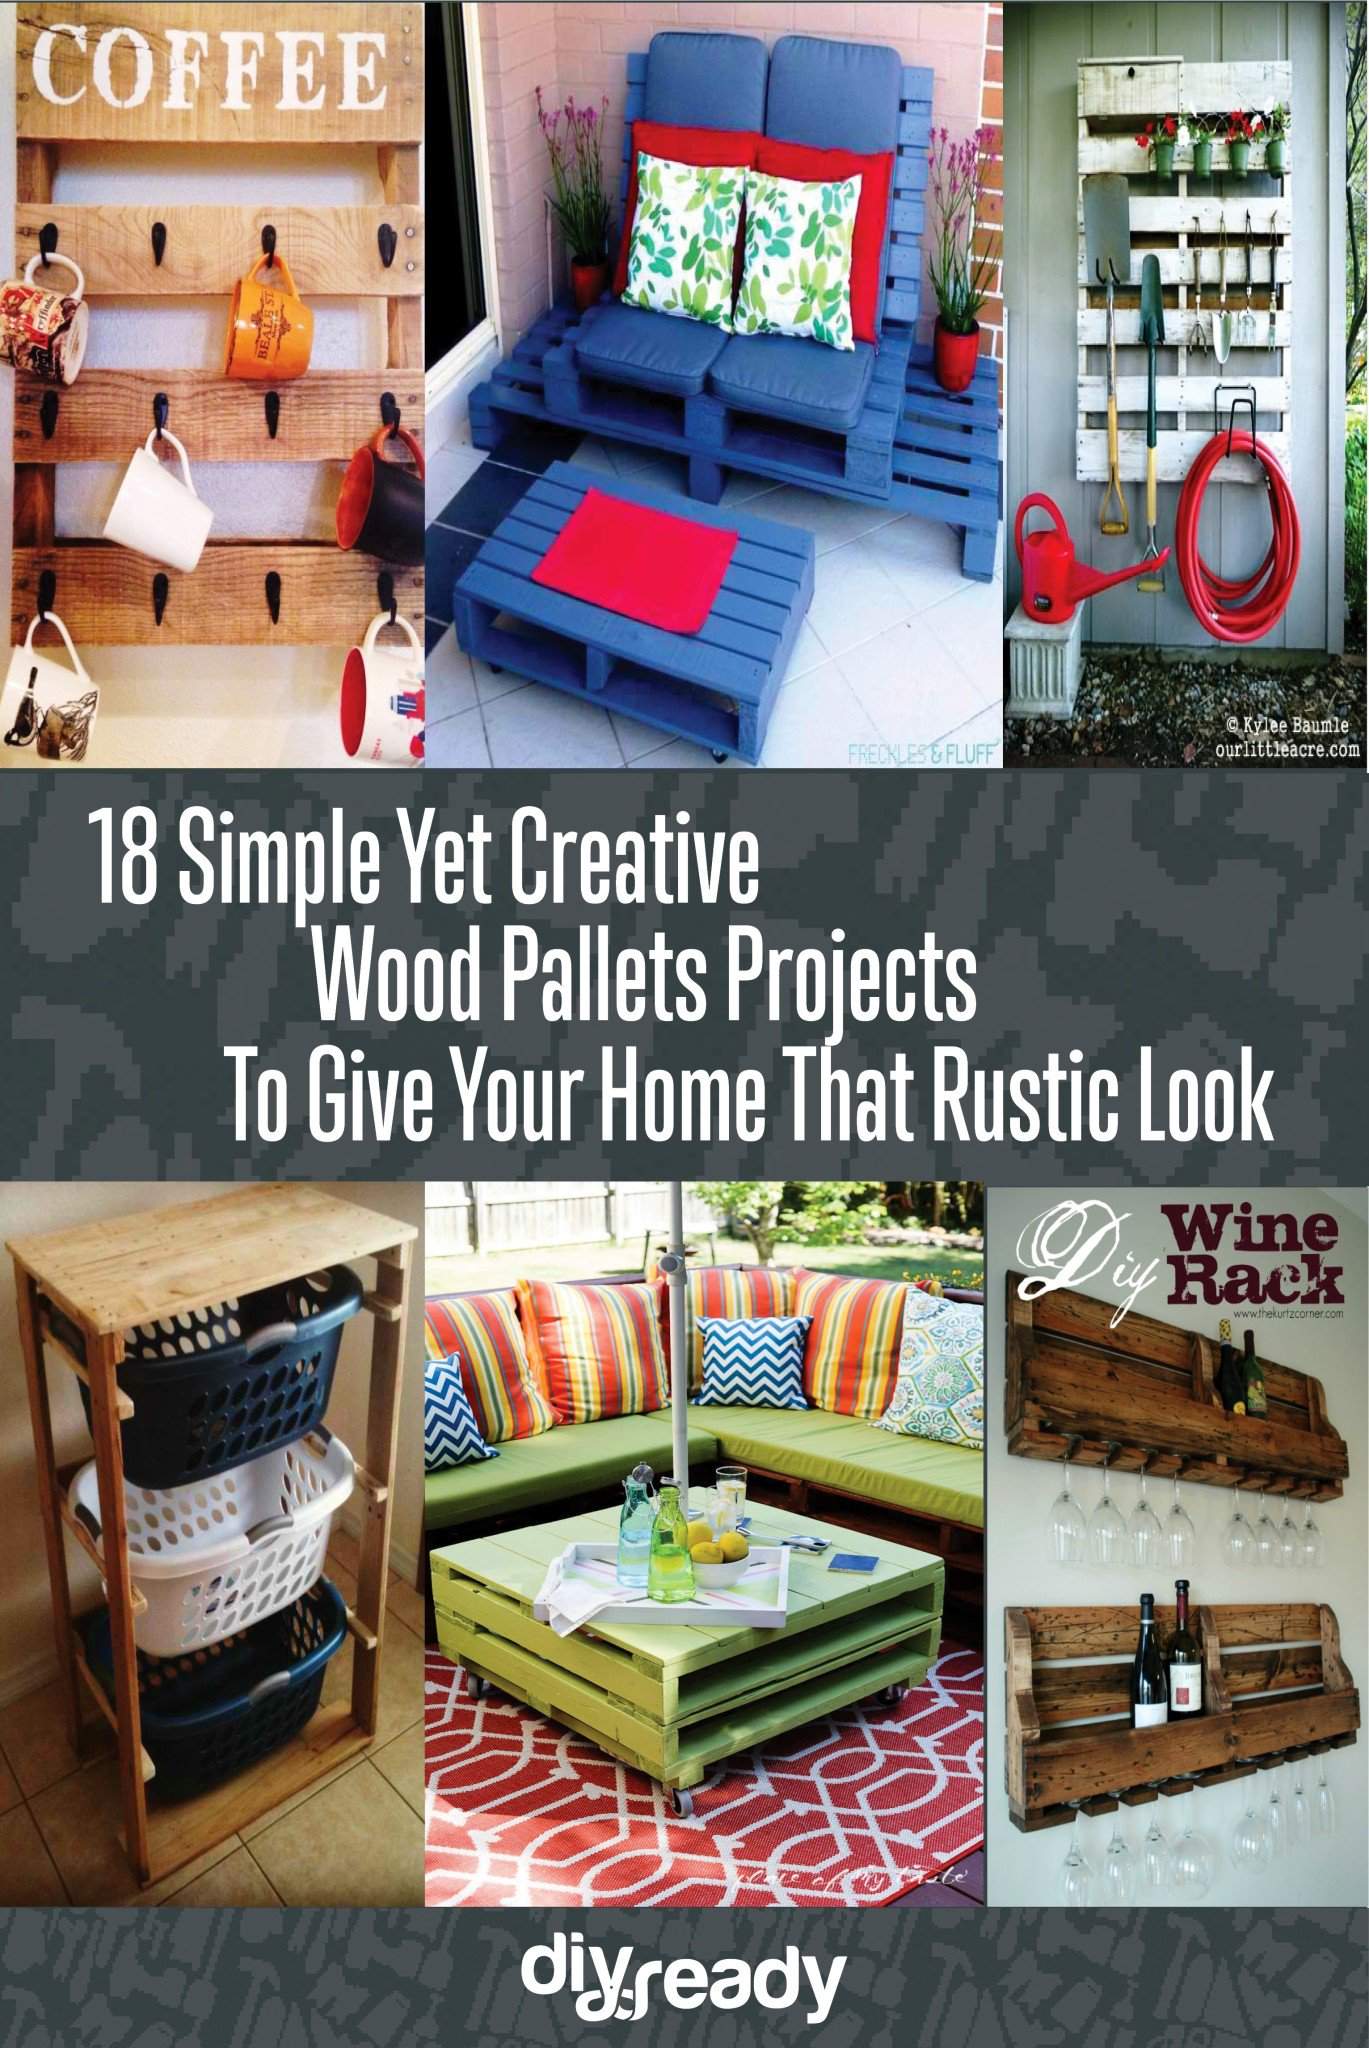 18 Simple Yet Creative Wood Pallets Projects To Give Your Home That Rustic Look